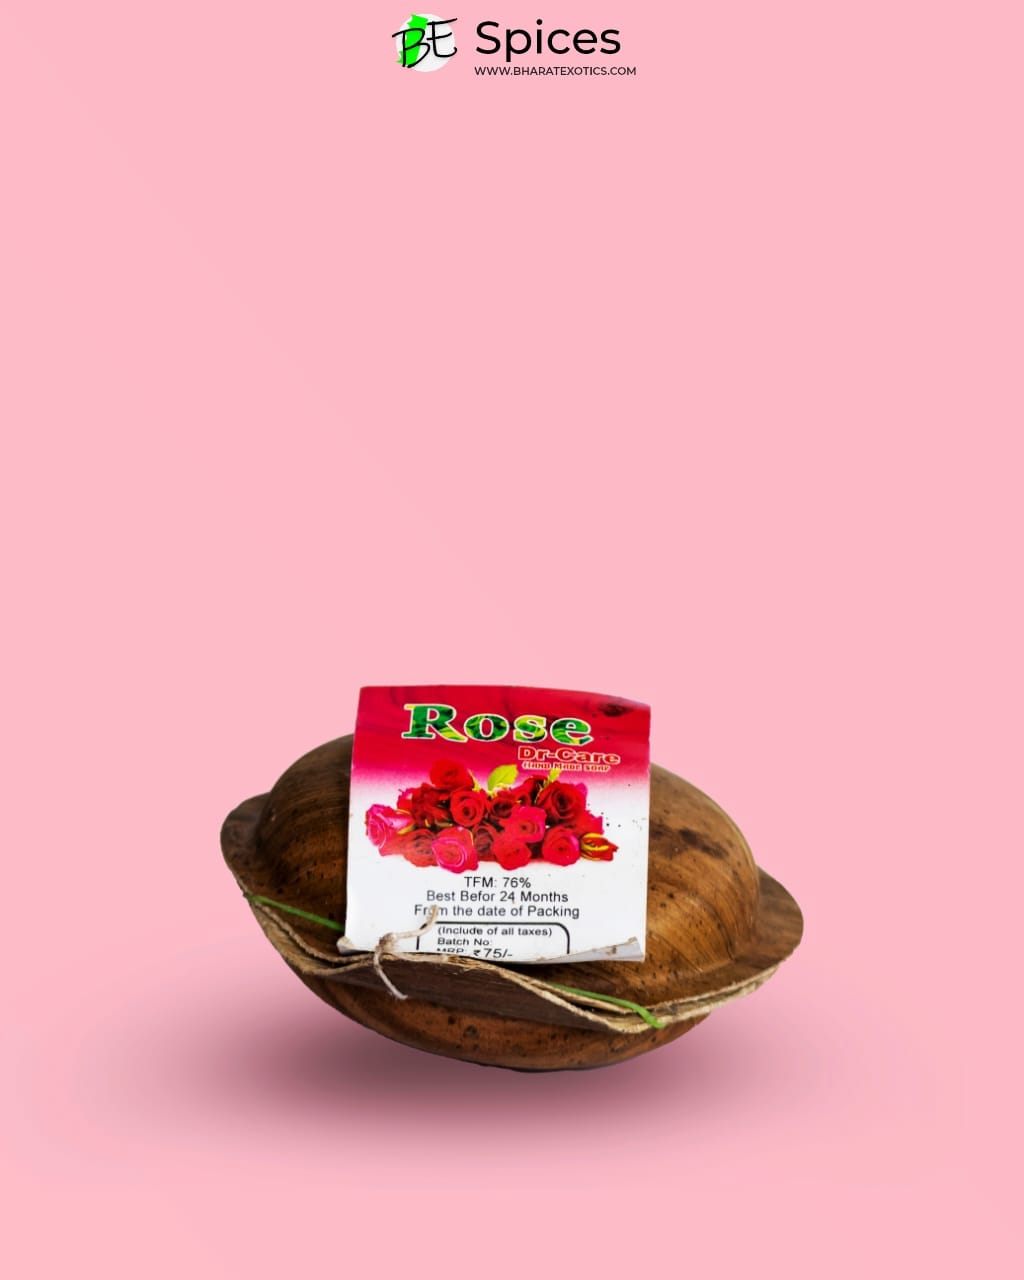 Hand made soaps in attractive packing made of palm leaf-Rose